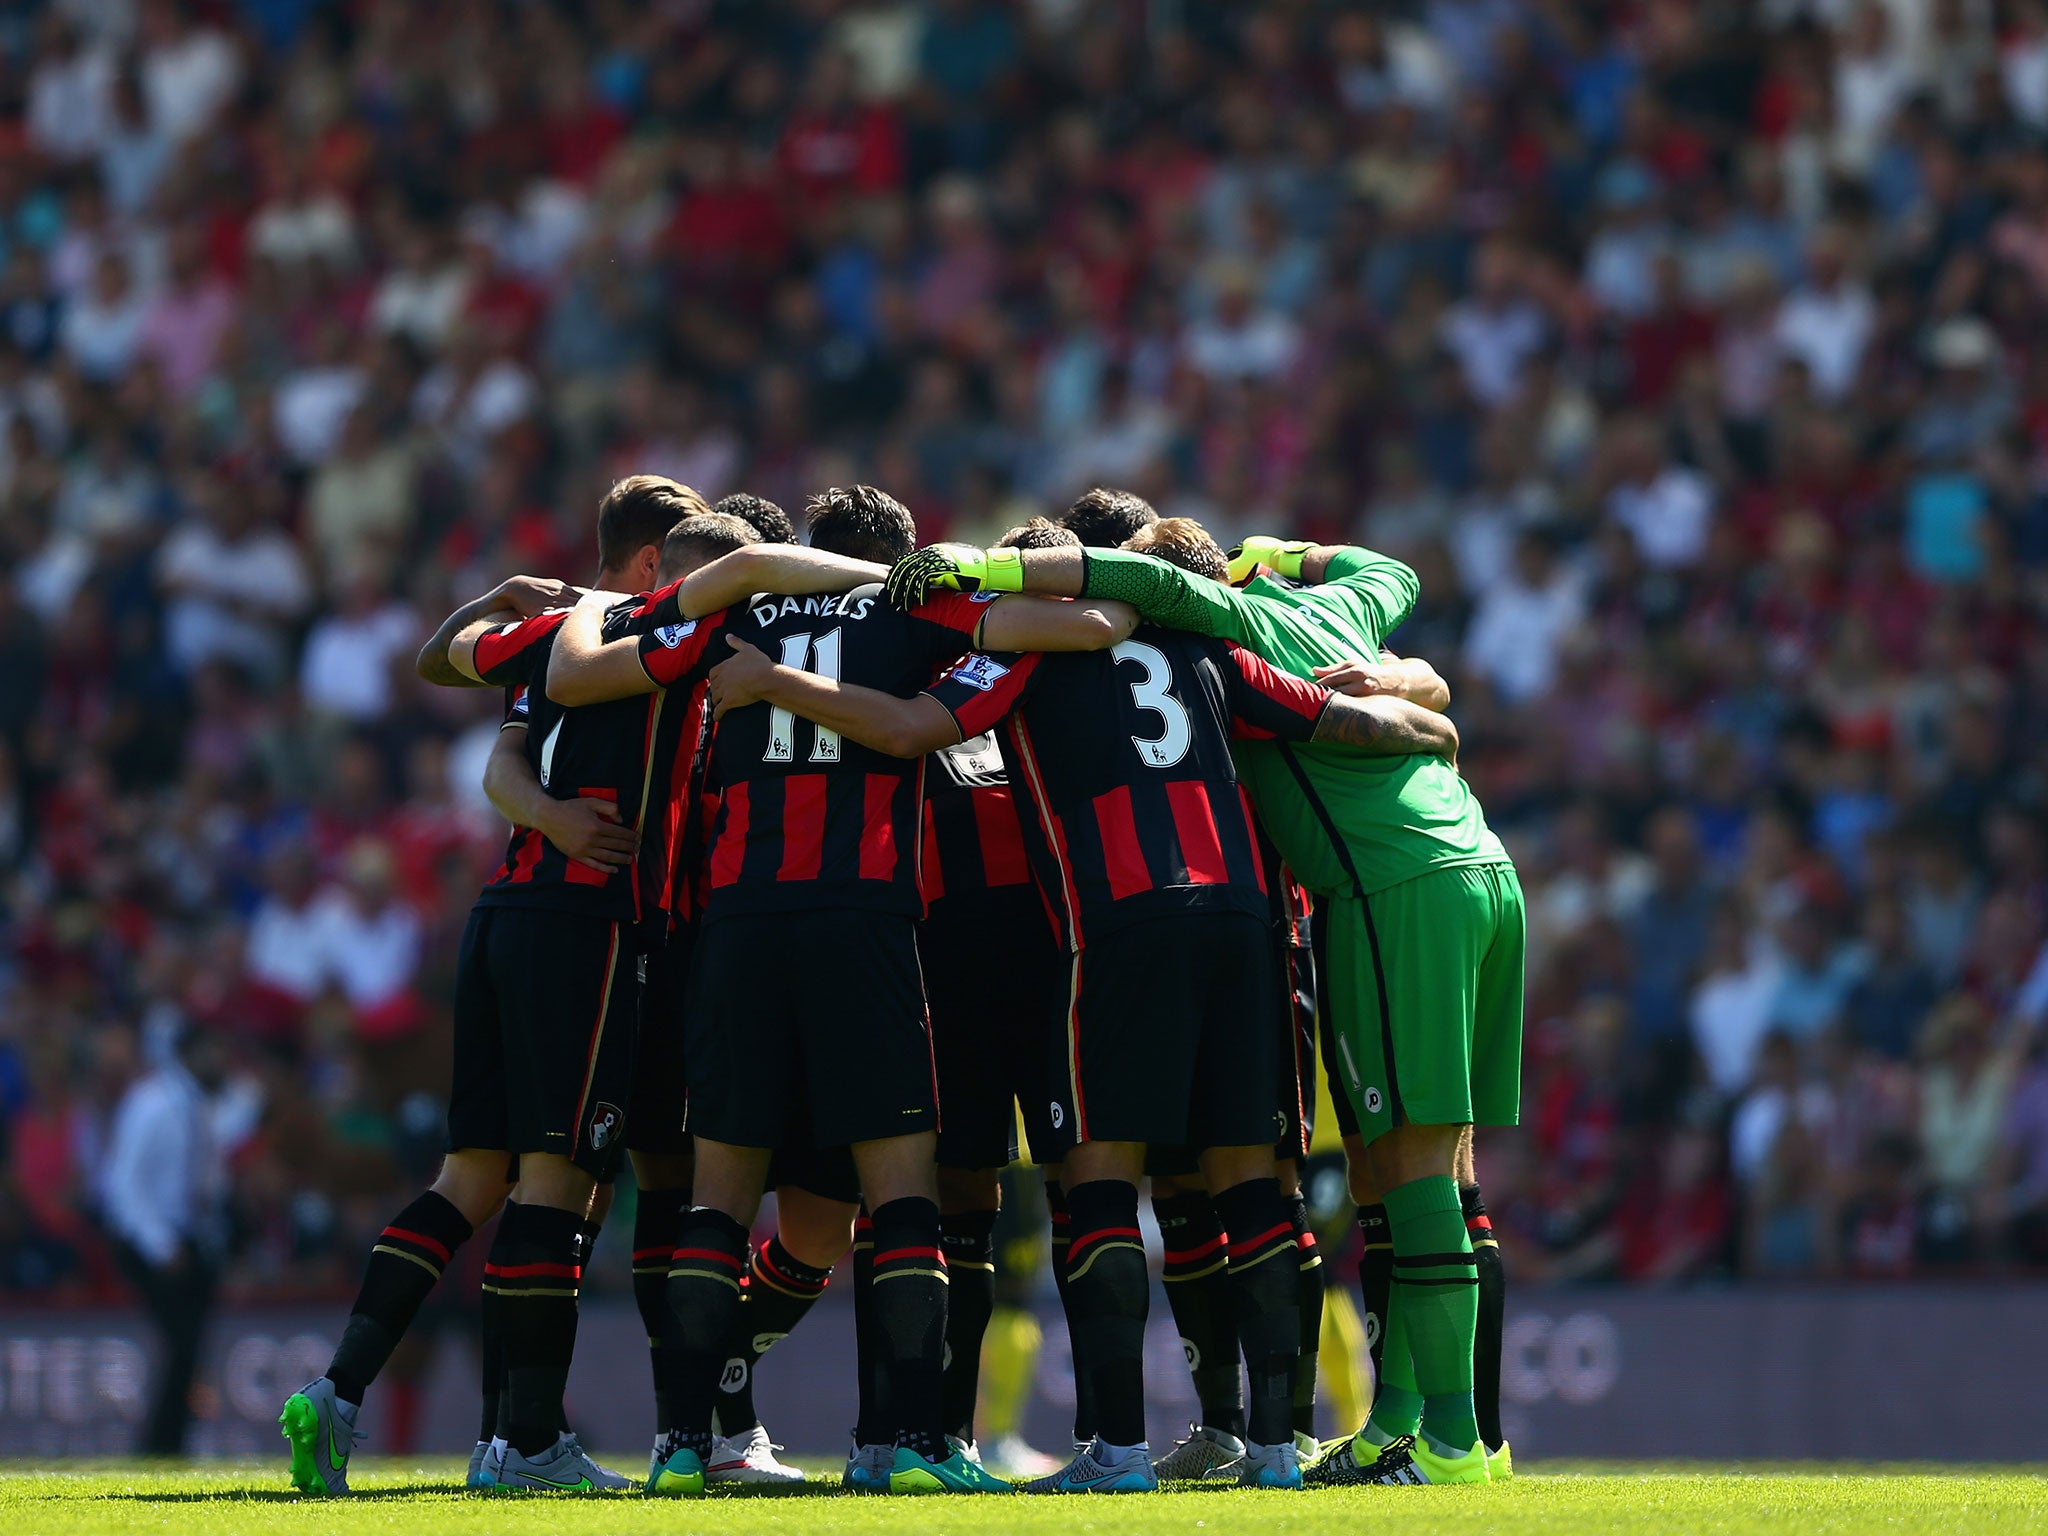 Bournemouth players form a huddle prior to kick off